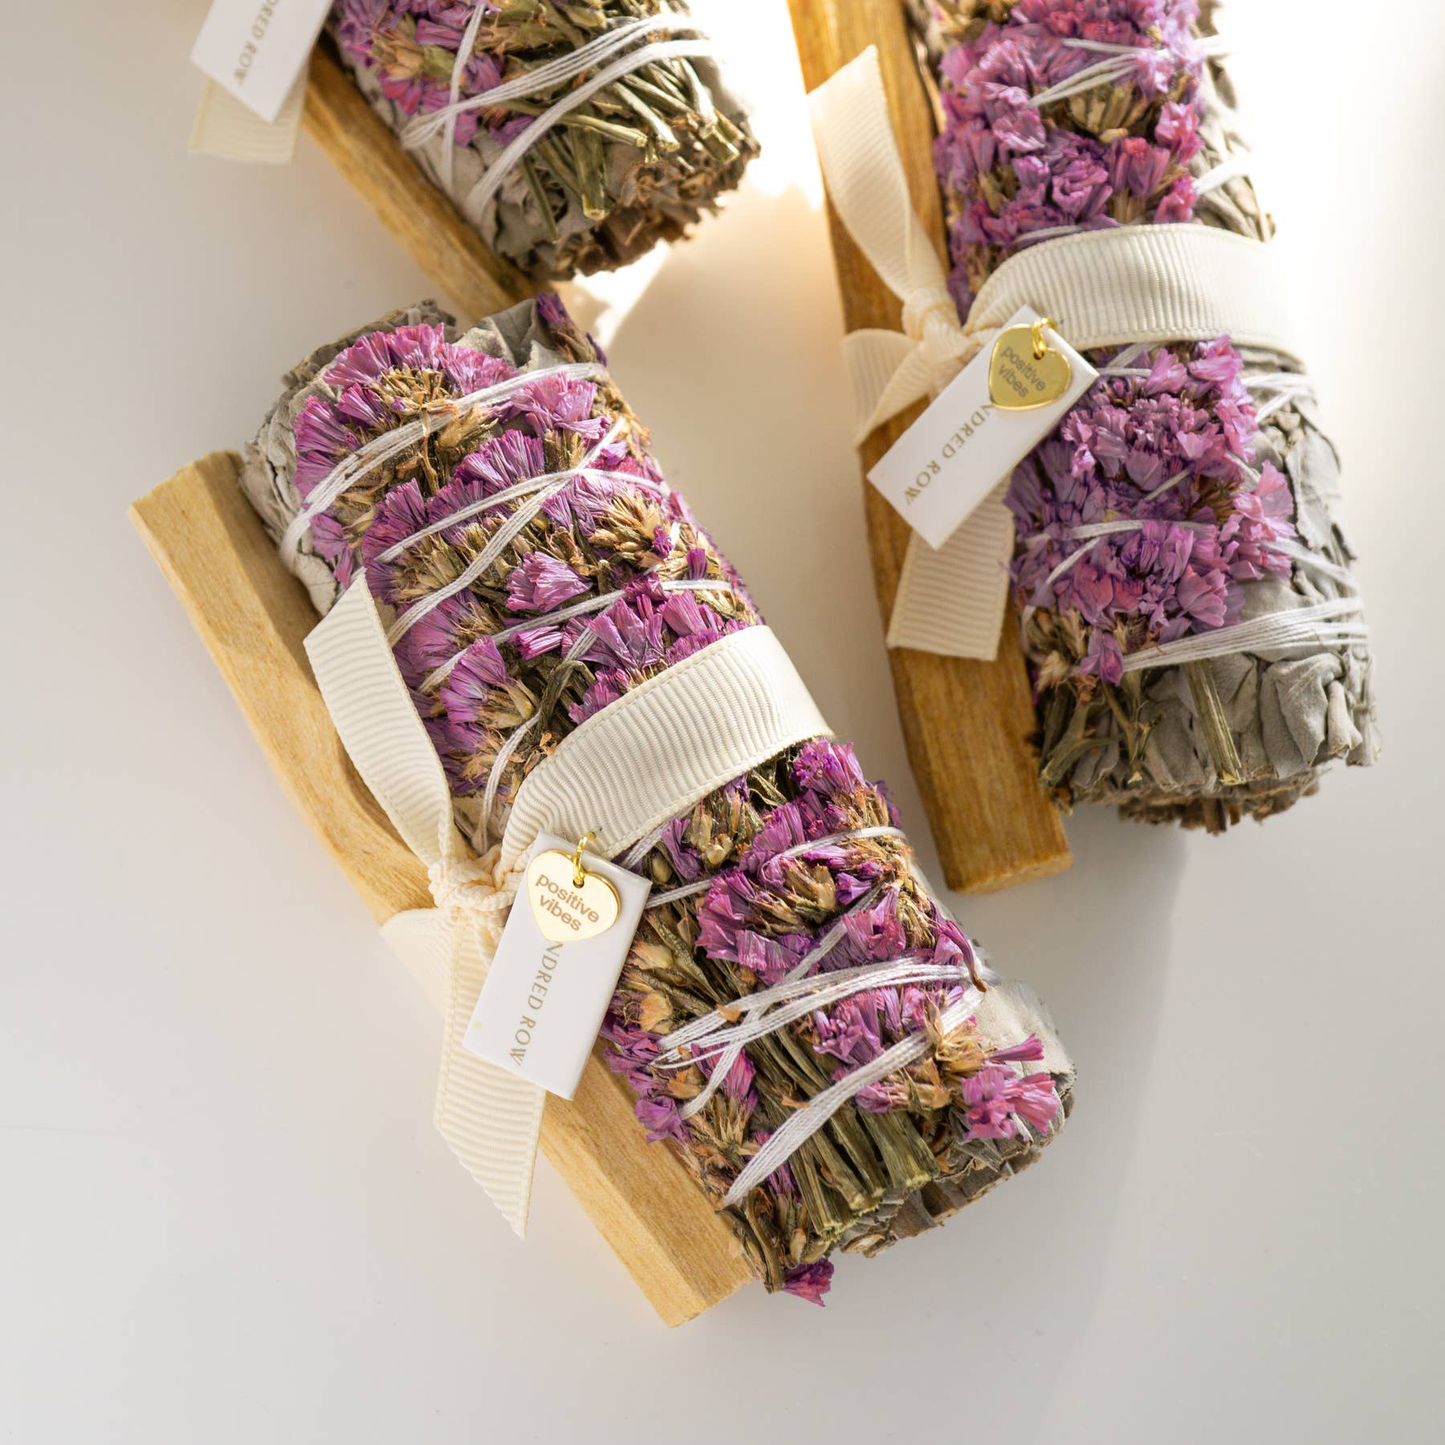 Items for Spiritual Cleansing - Sage and Flowers Bundle, Palo